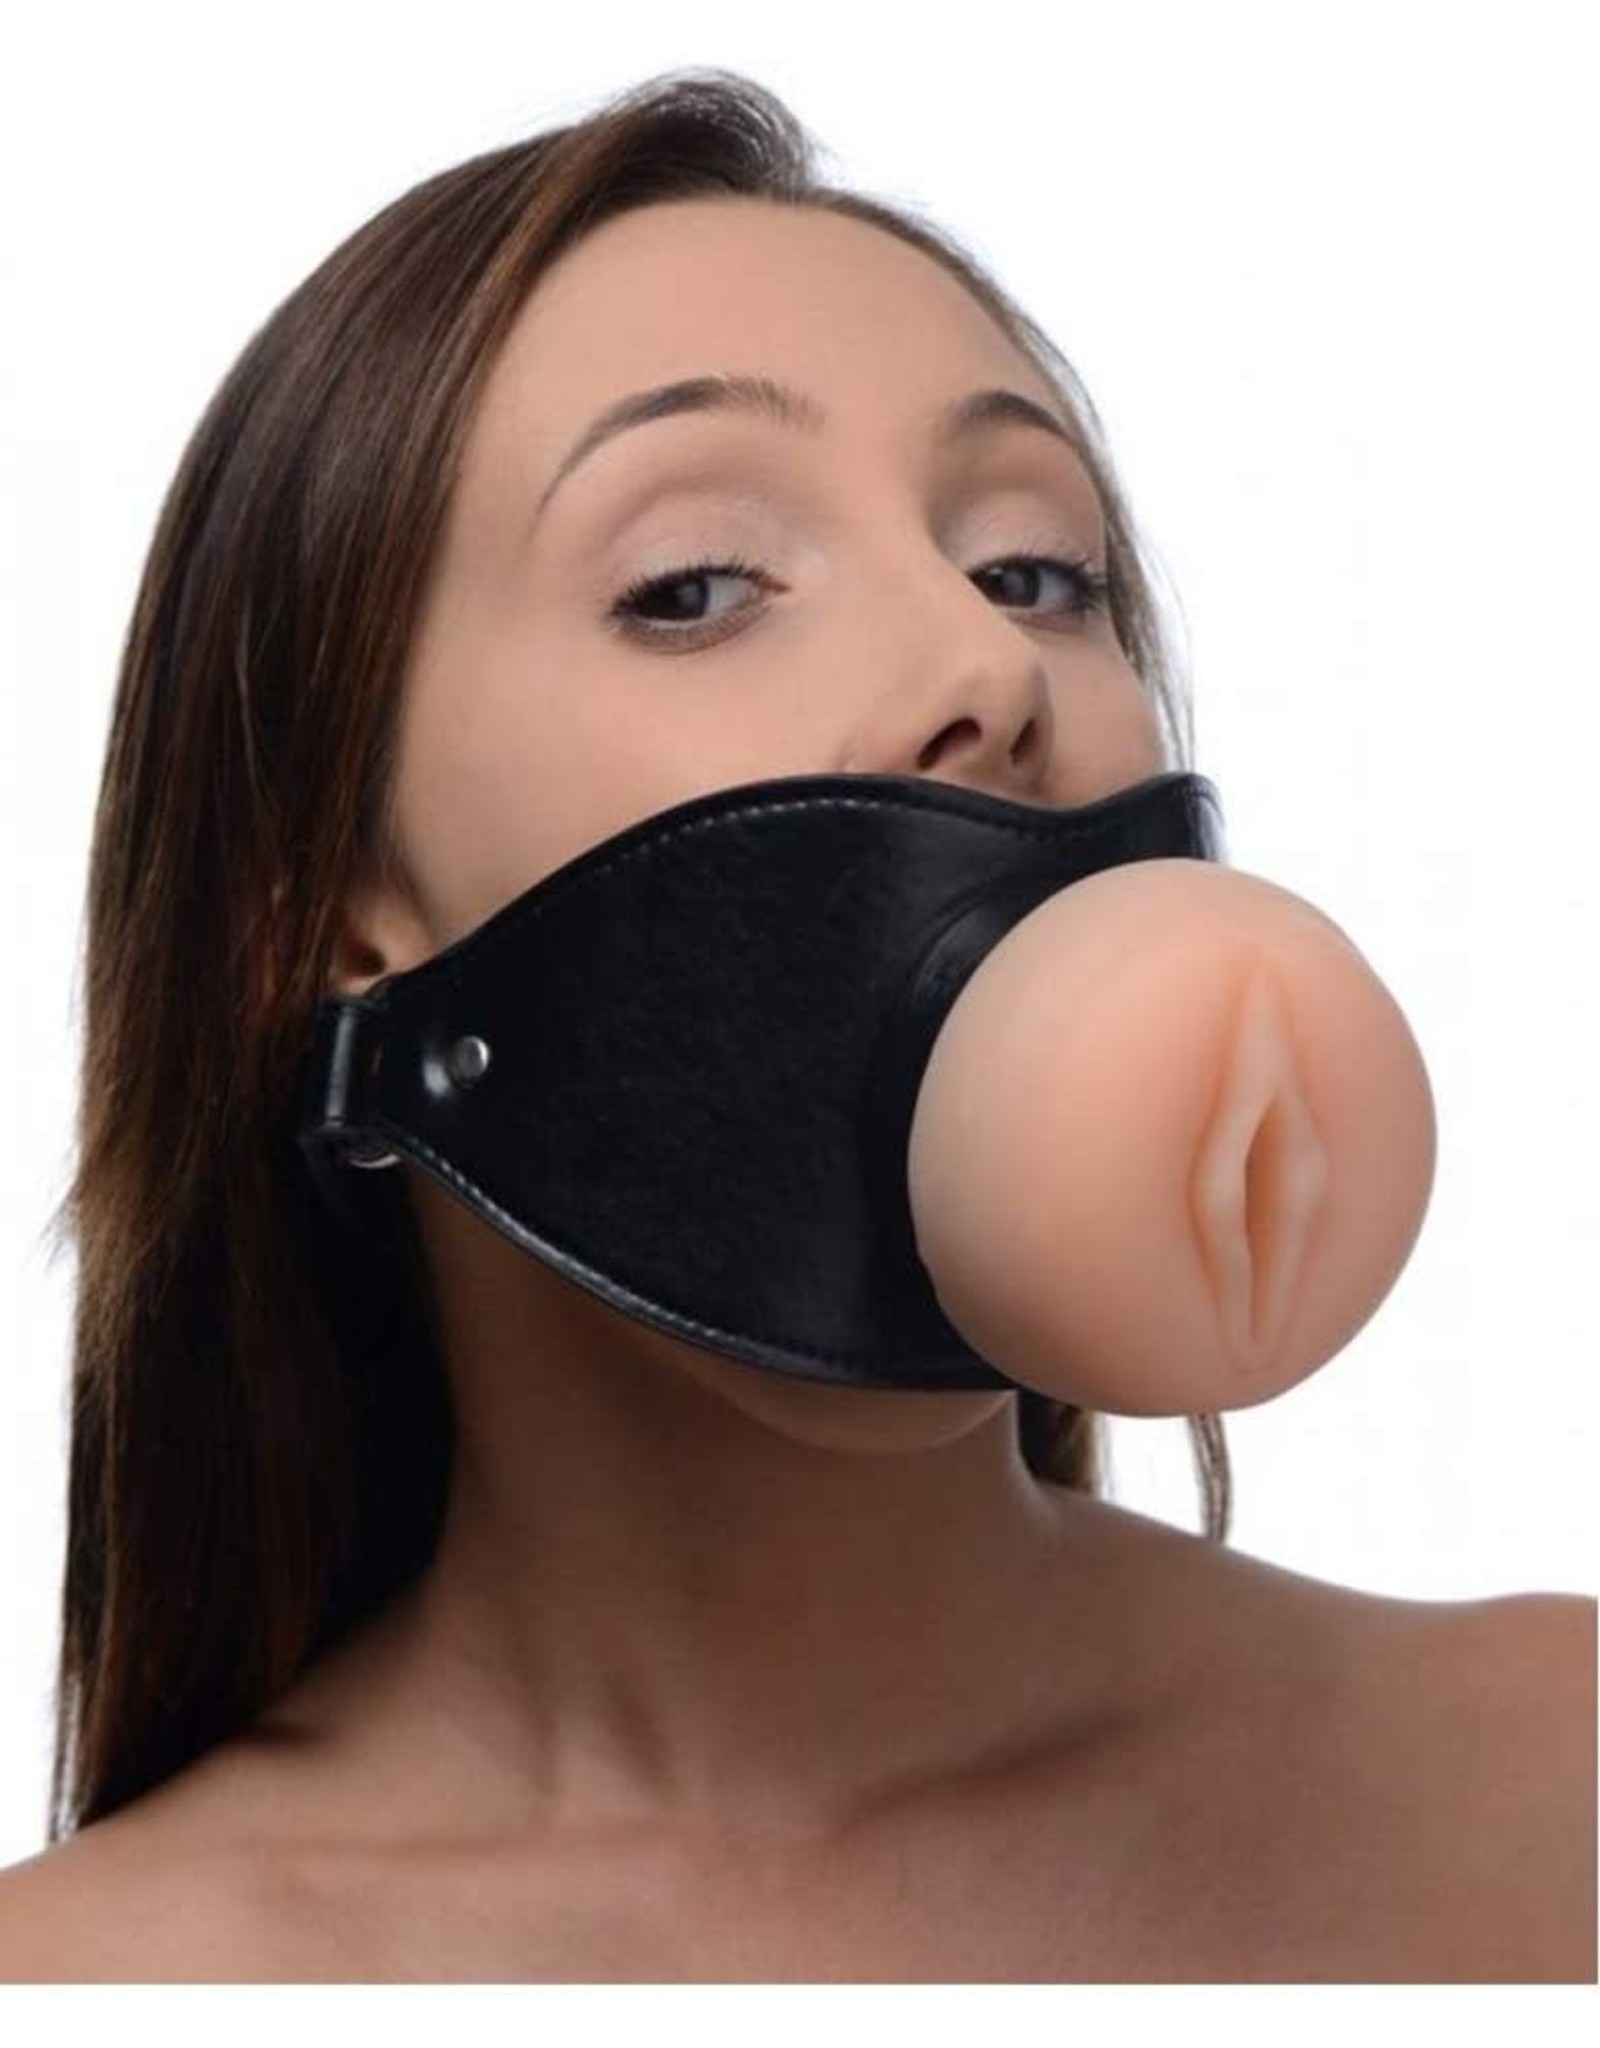 MASTER SERIES MASTER SERIES - PUSSY FACE ORAL SEX MOUTH GAG